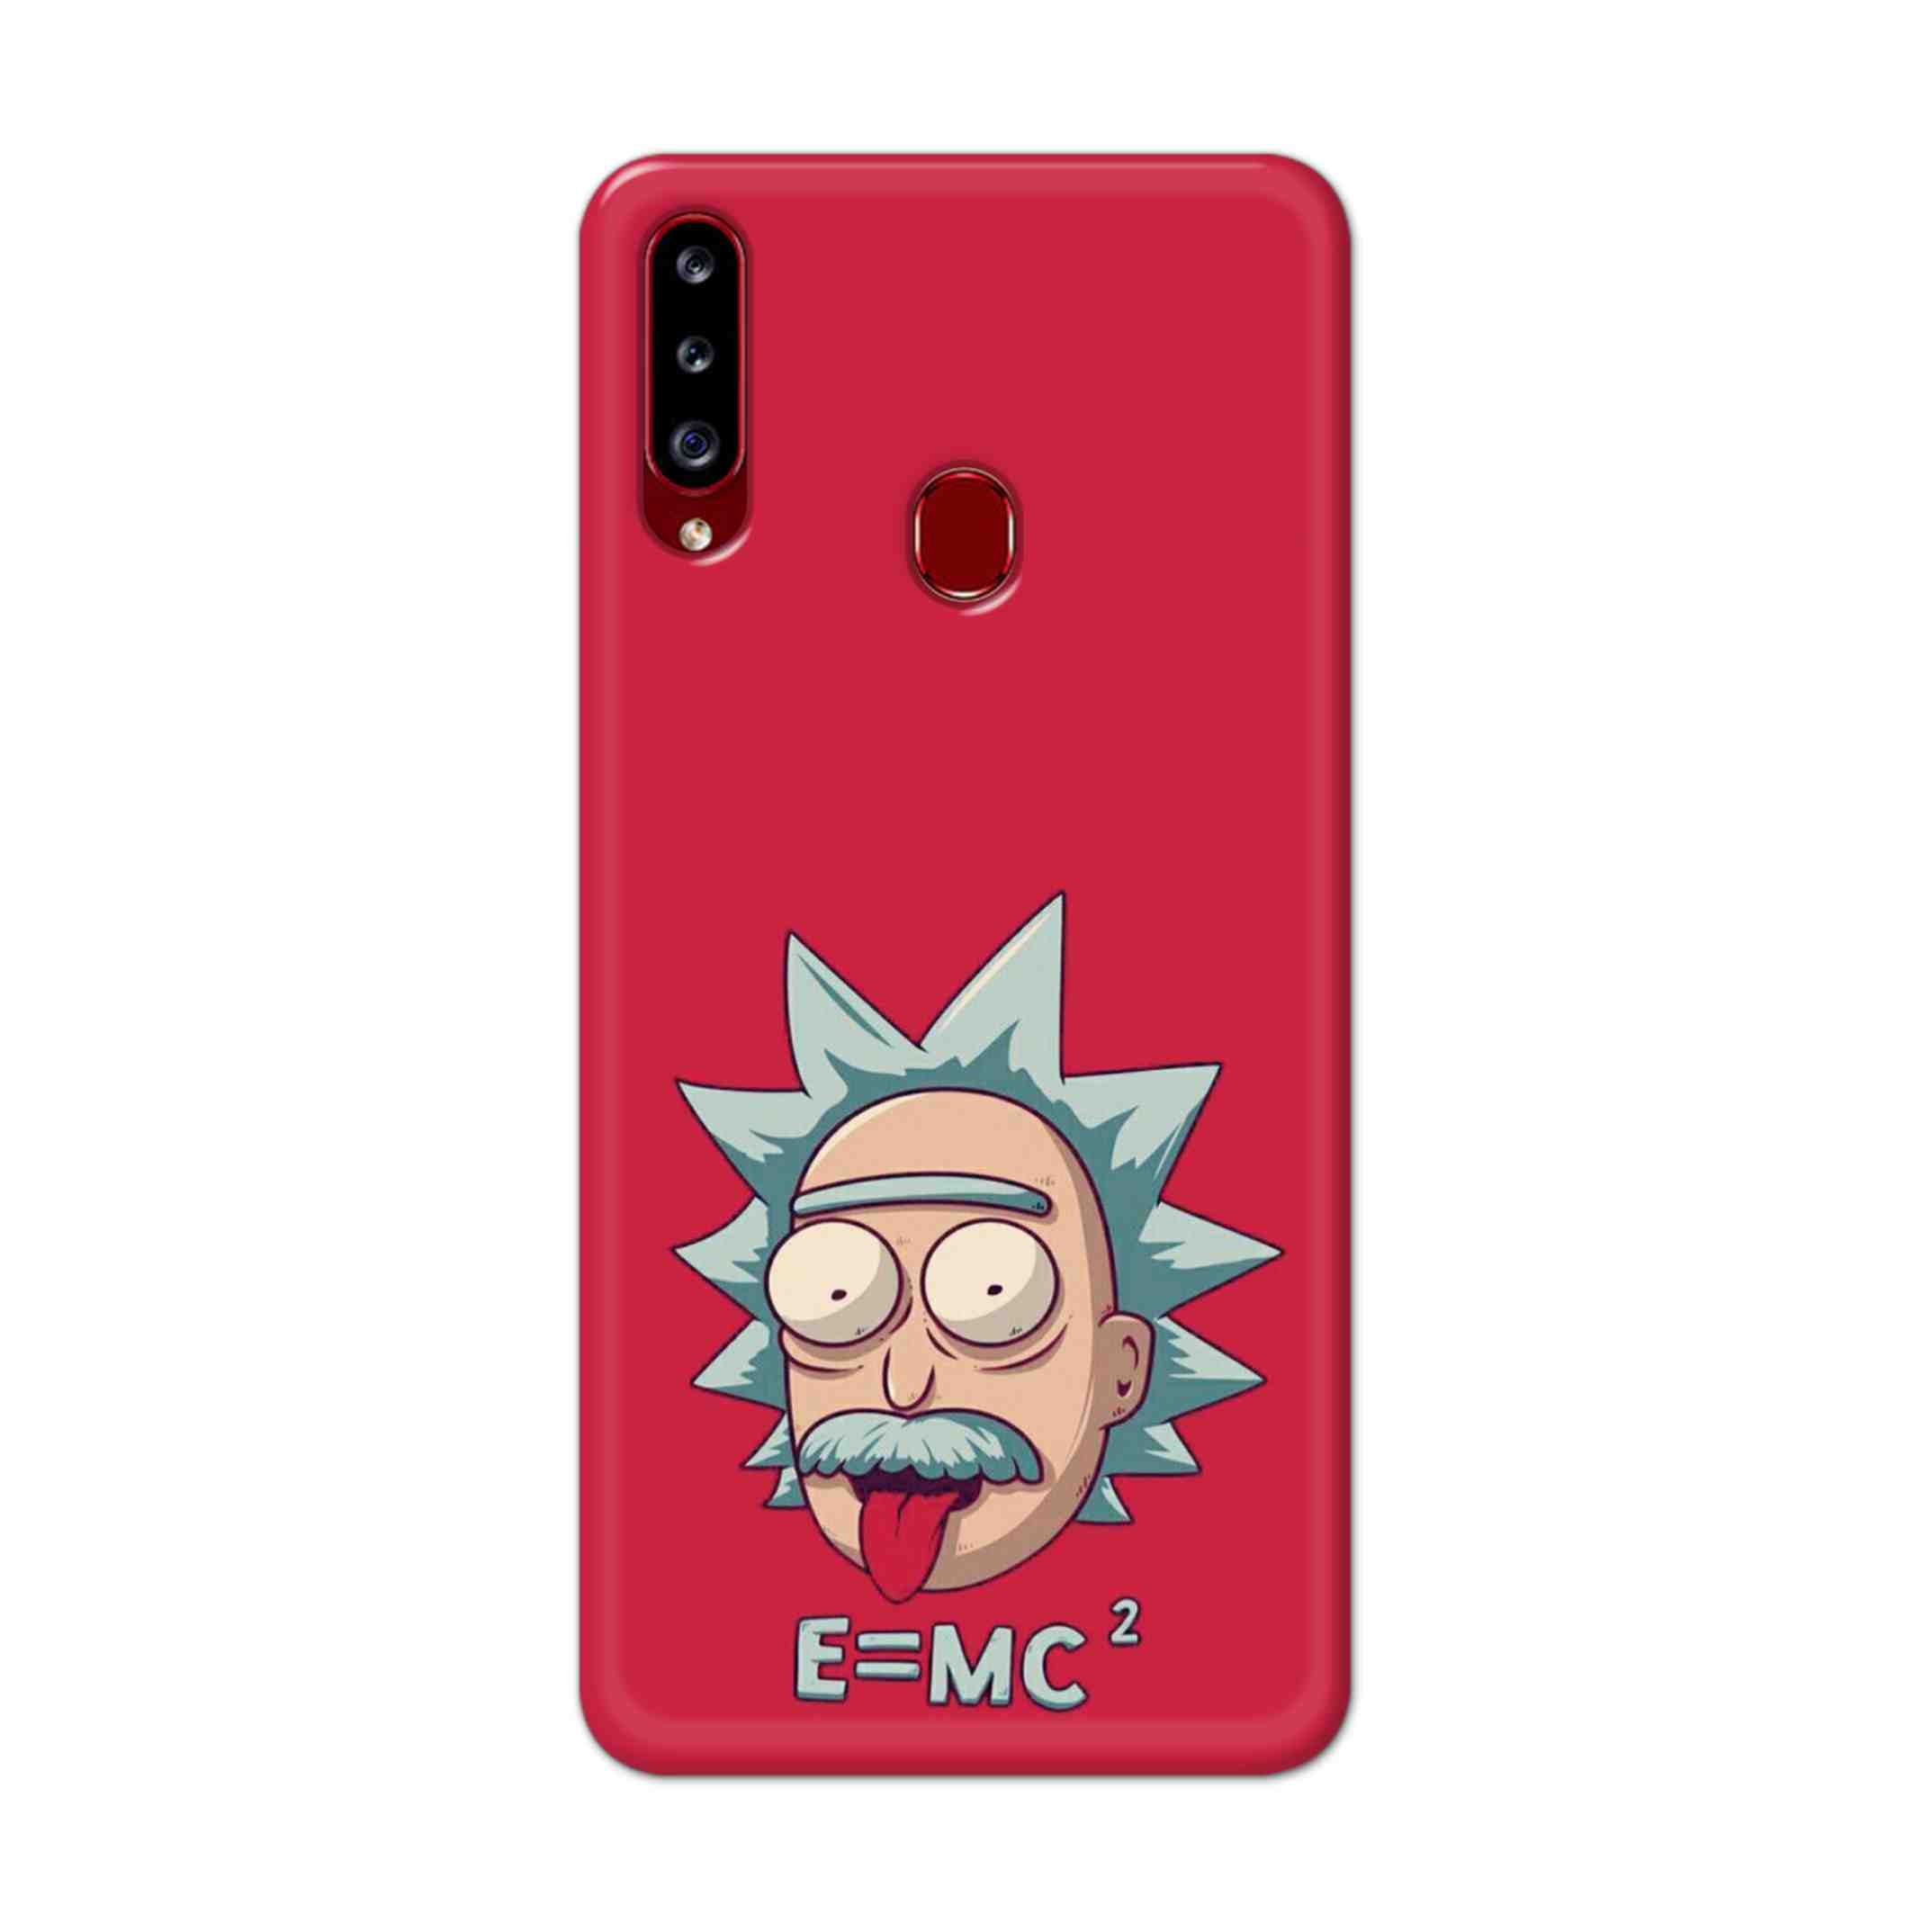 Buy E=Mc Hard Back Mobile Phone Case Cover For Samsung A20s Online